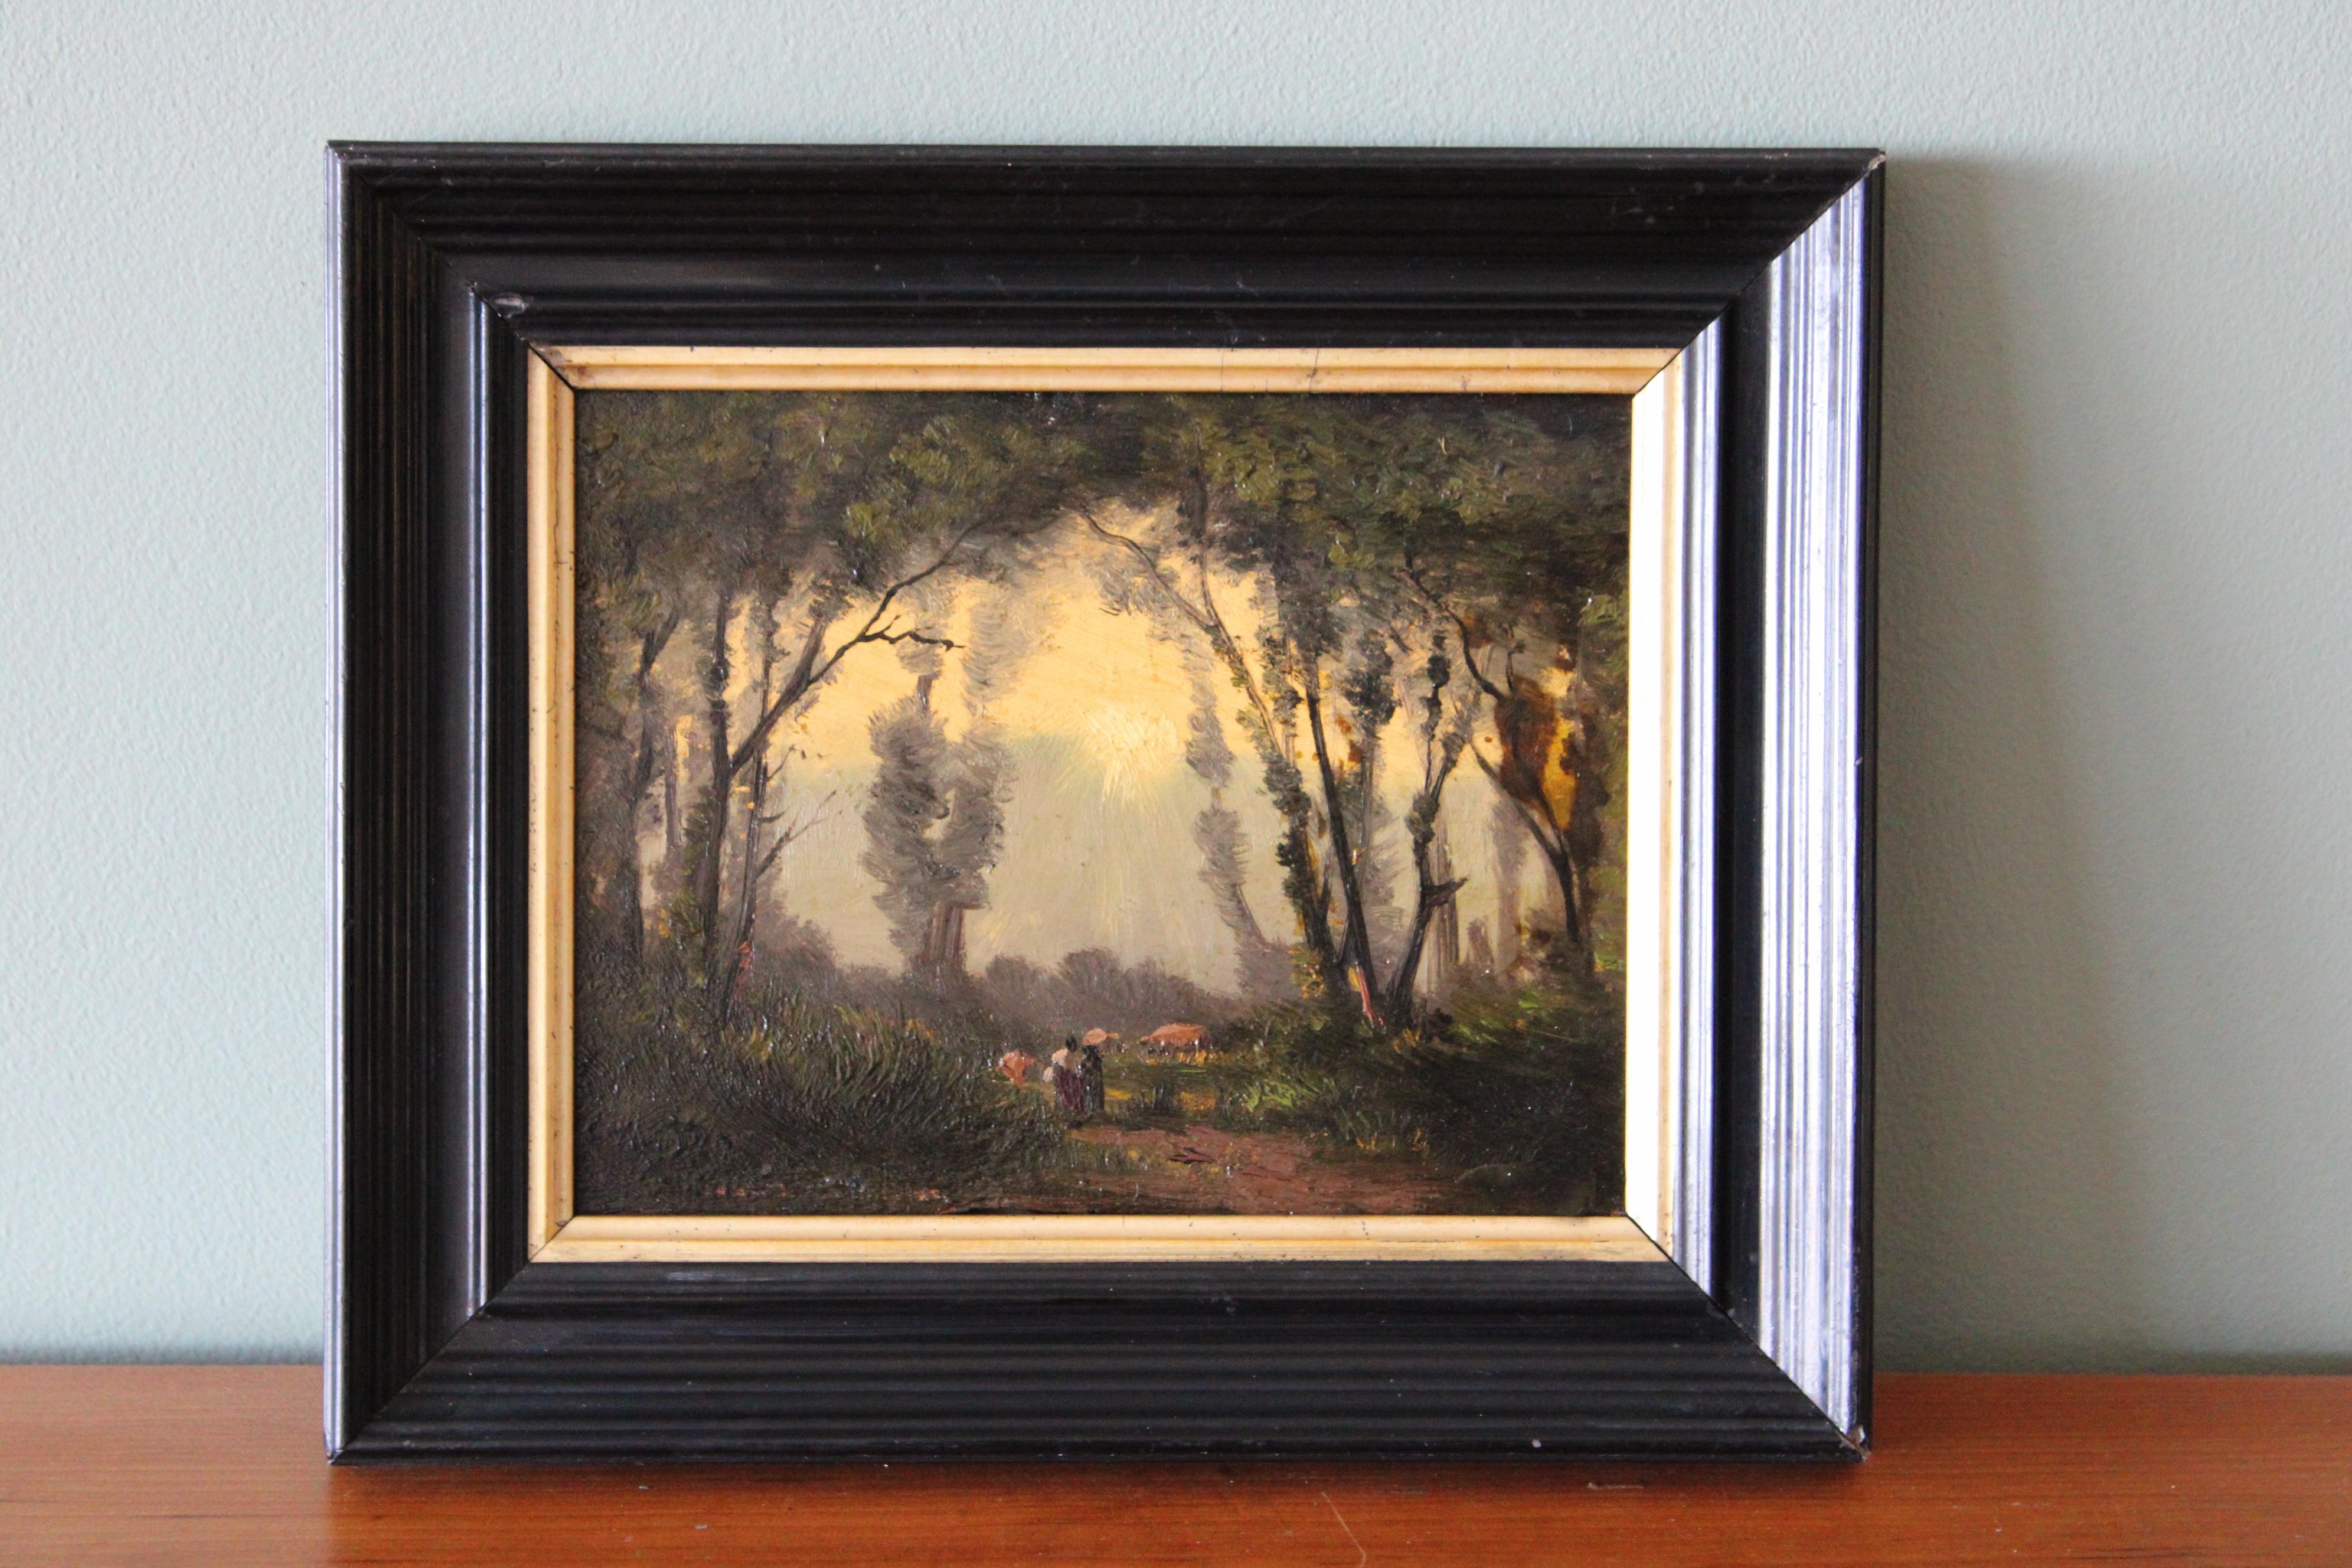 Antique French Barbizon Landscape by Charles Donzel (1824-1899) 1